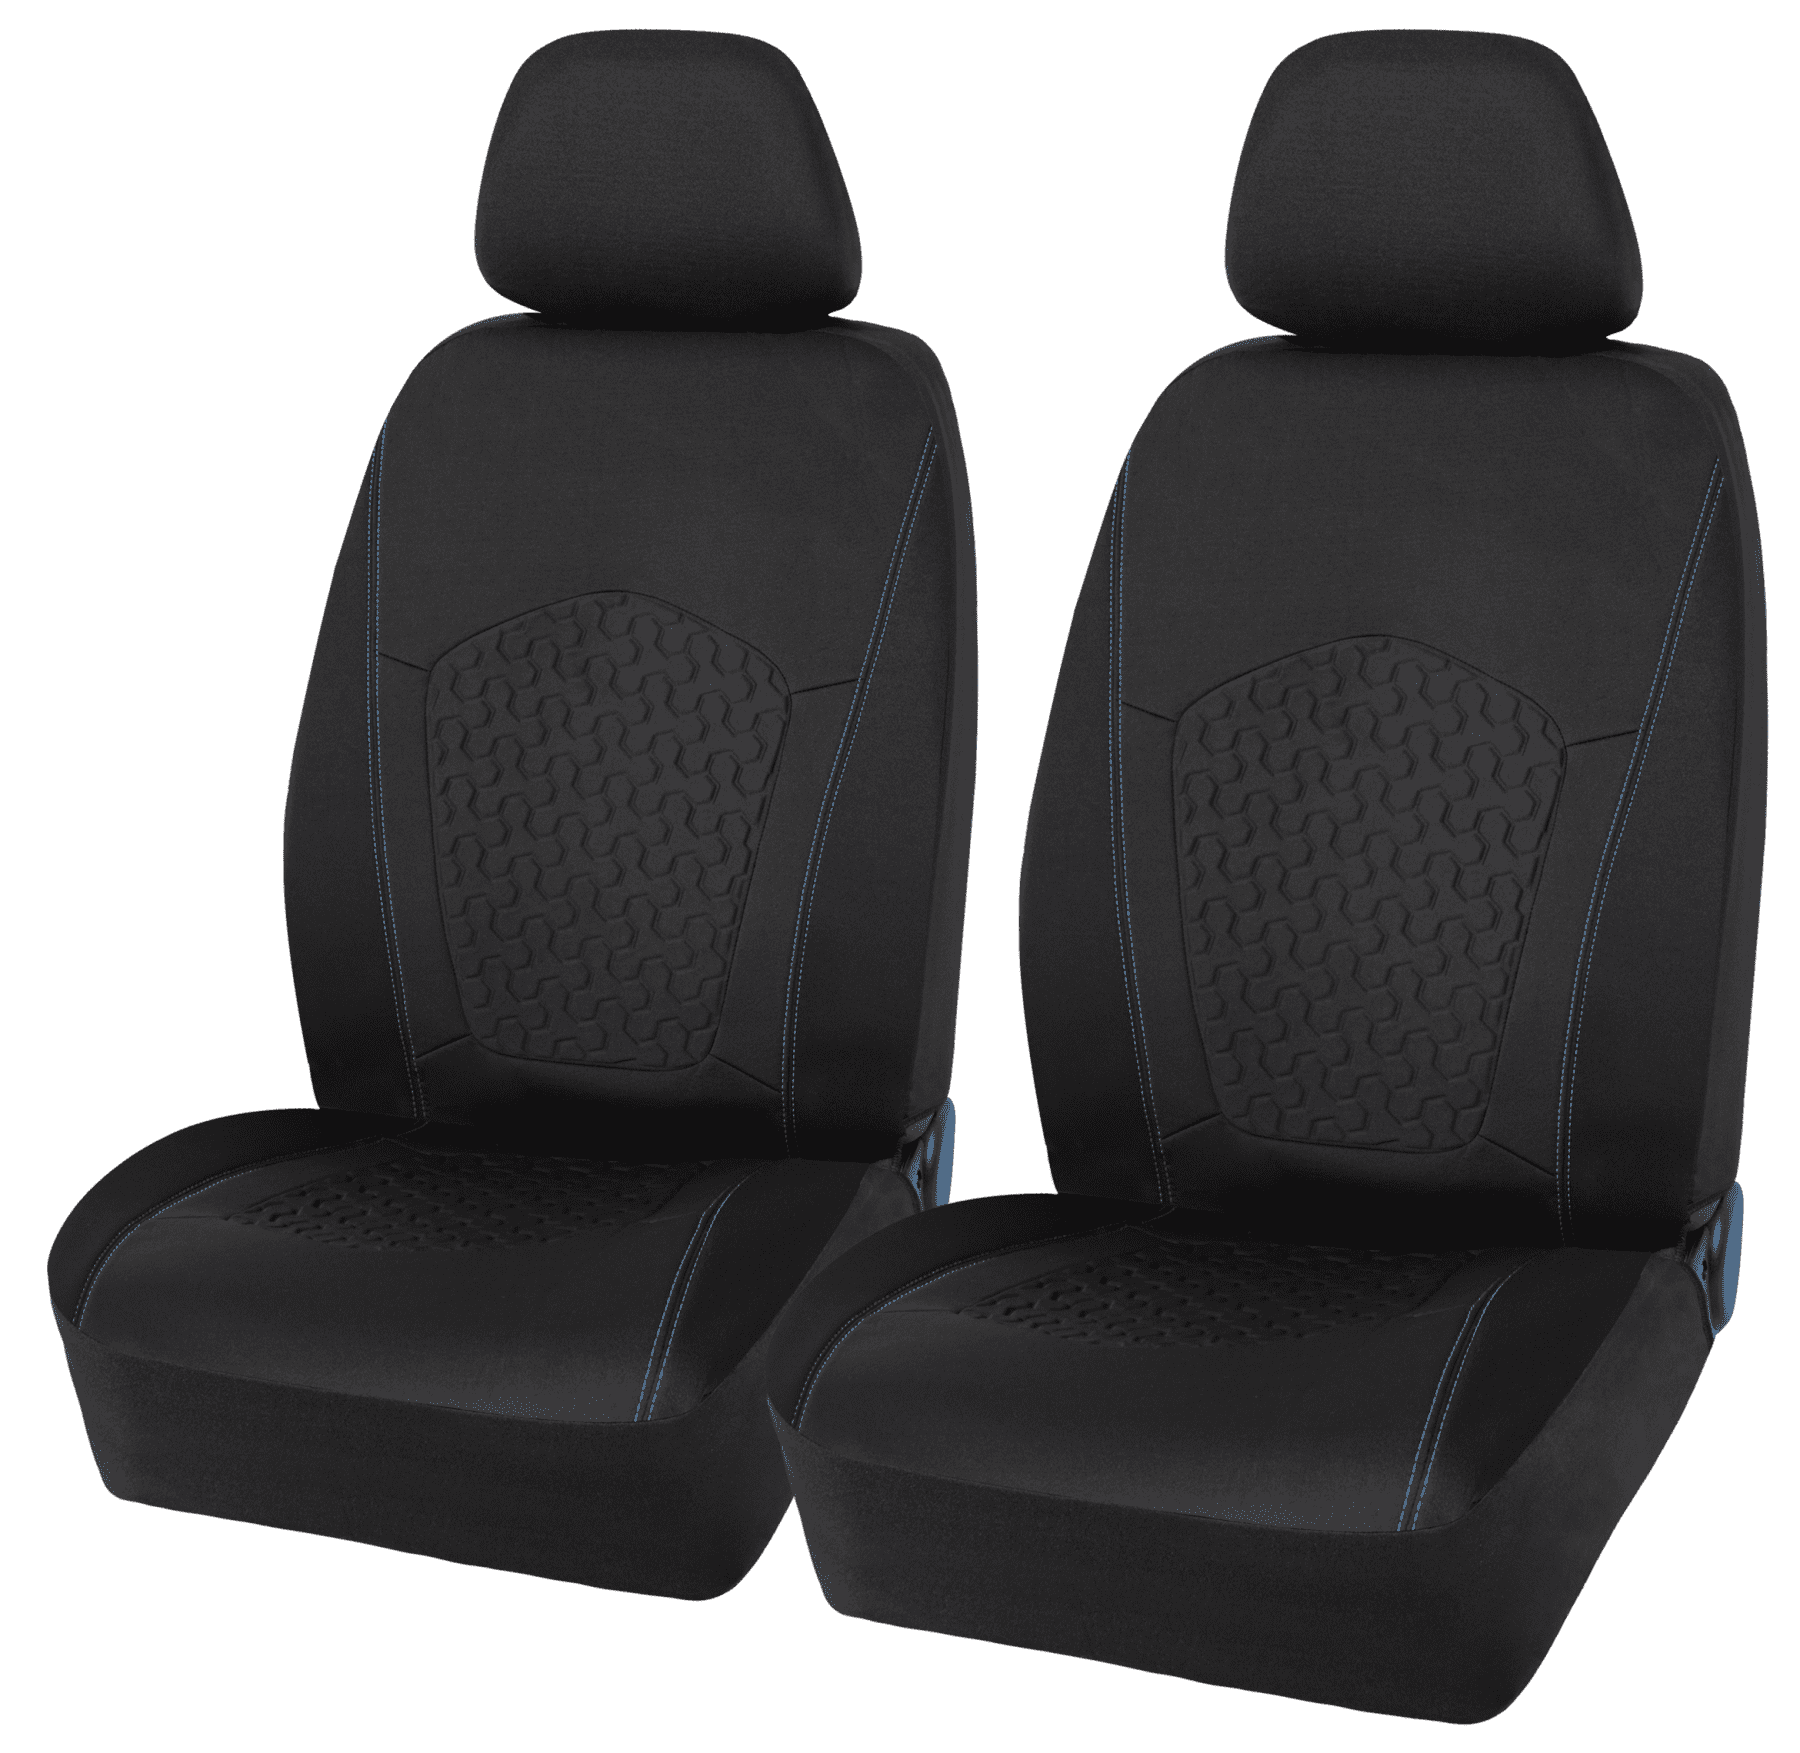 Extra Large Big Size SUV Car cooling Seat Cushion with head cover -  Mdgloble 全球领先的汽车零部件采供平台--全球汽贸网 - Powered by MDGloble